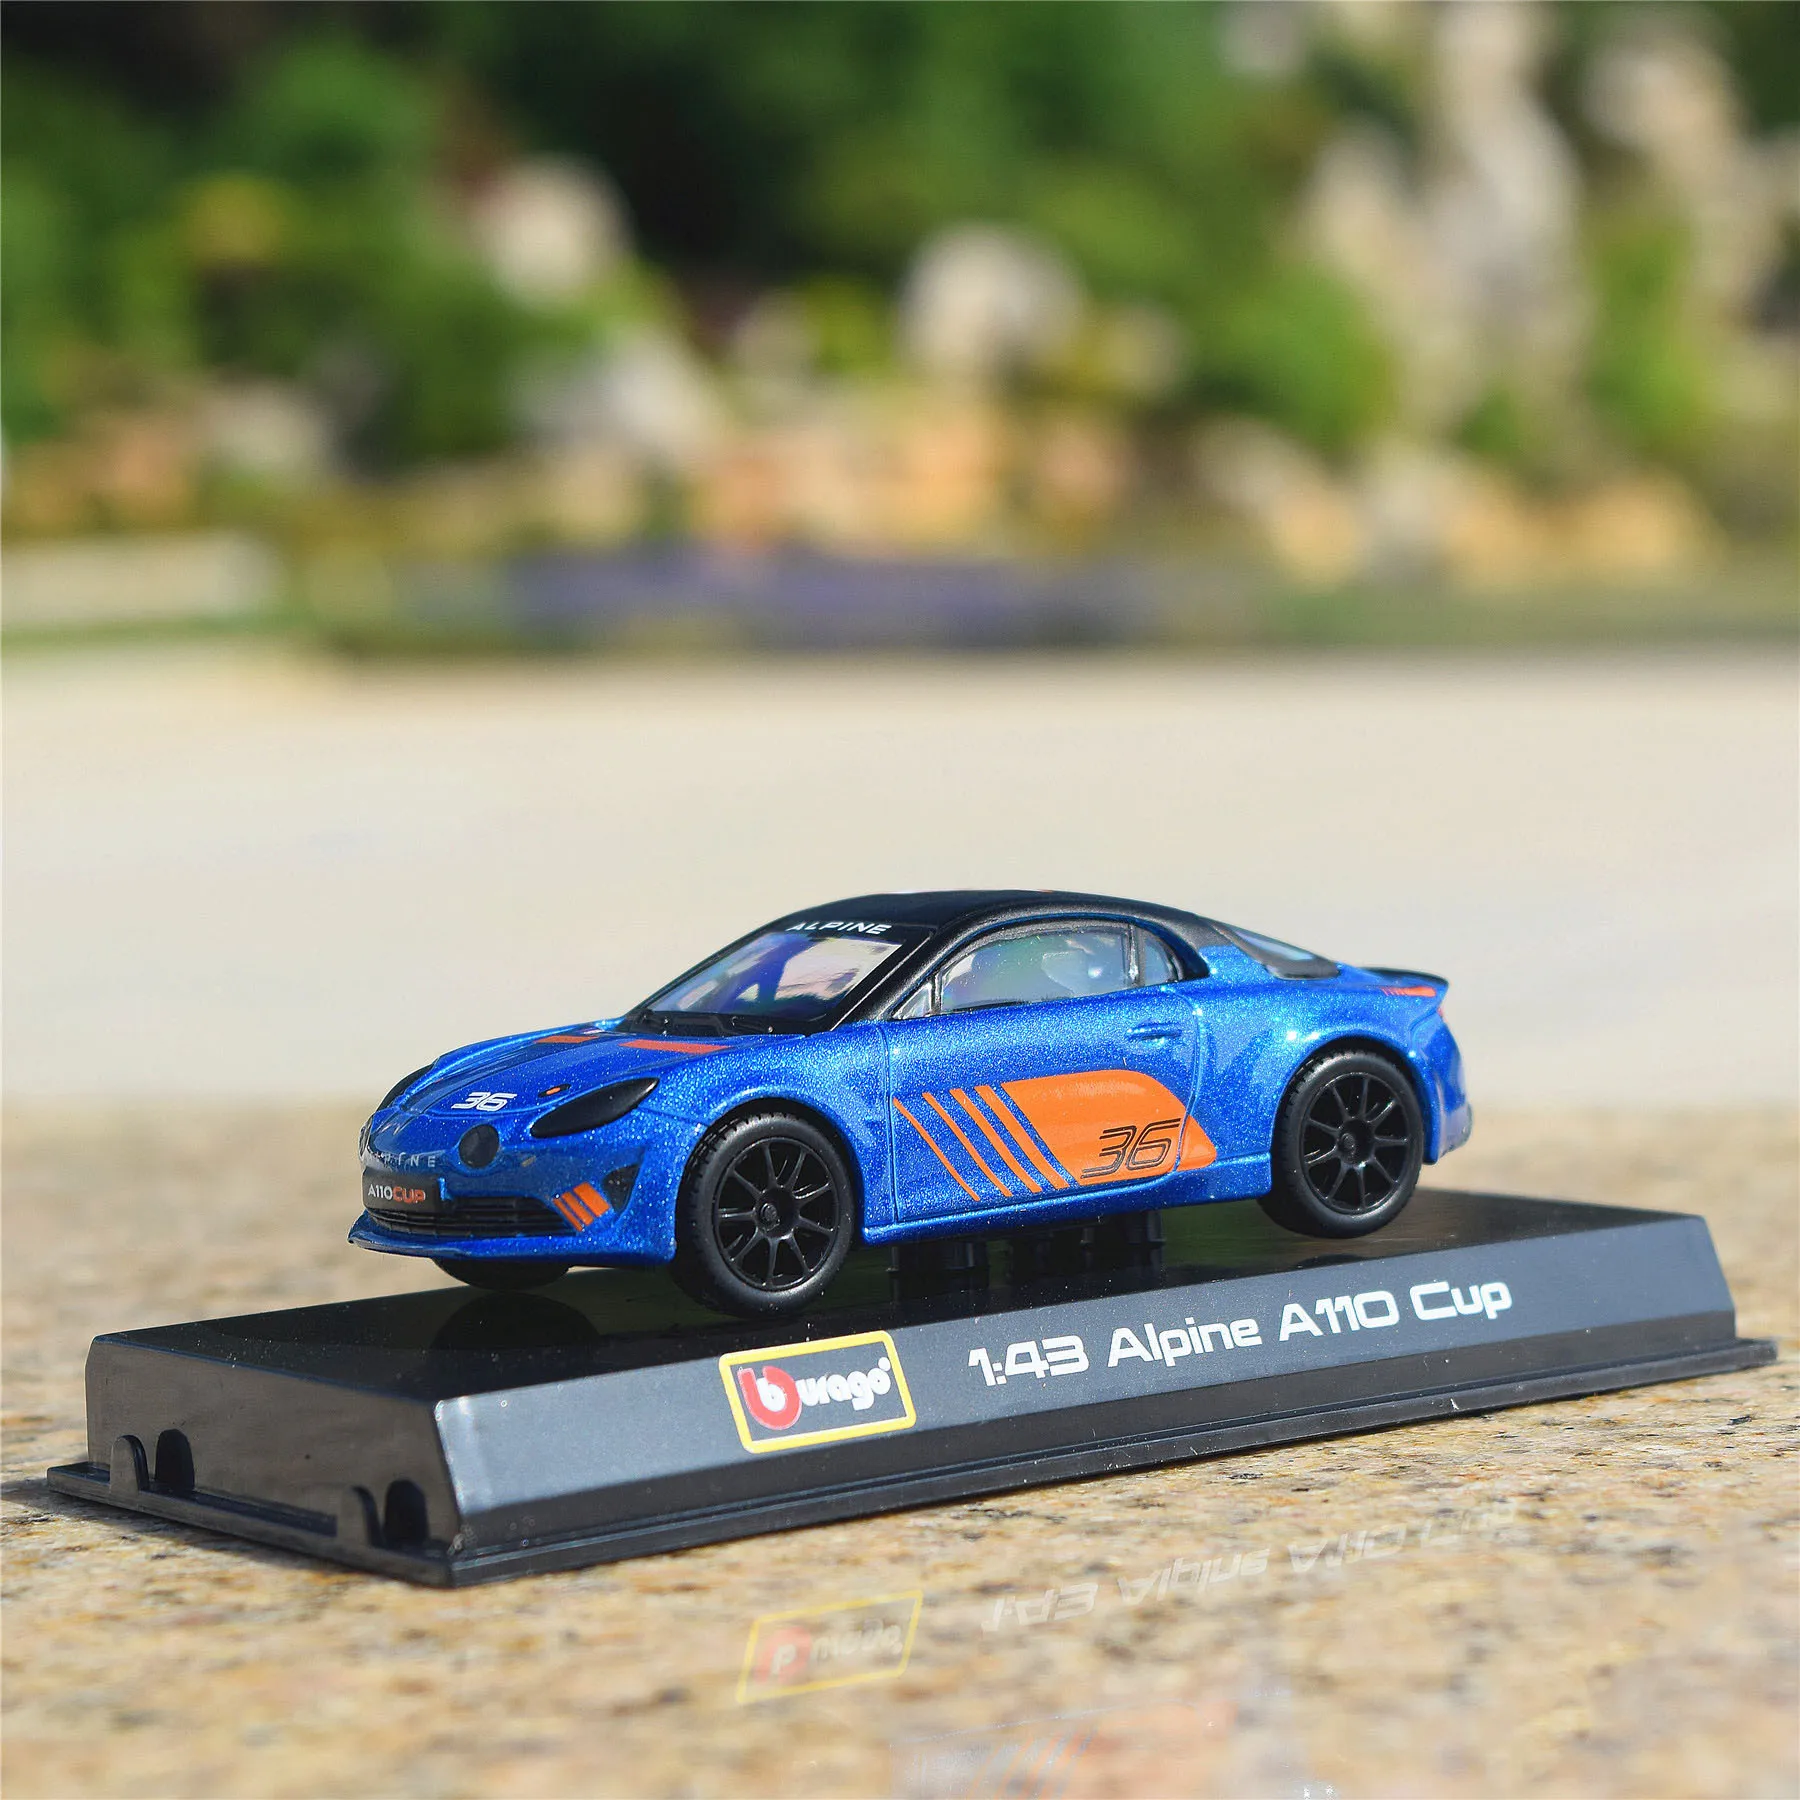 Bburago 1:43 Renault Alpine A110 Cup Simulation alloy super toy car model For with Steering wheel control front wheel